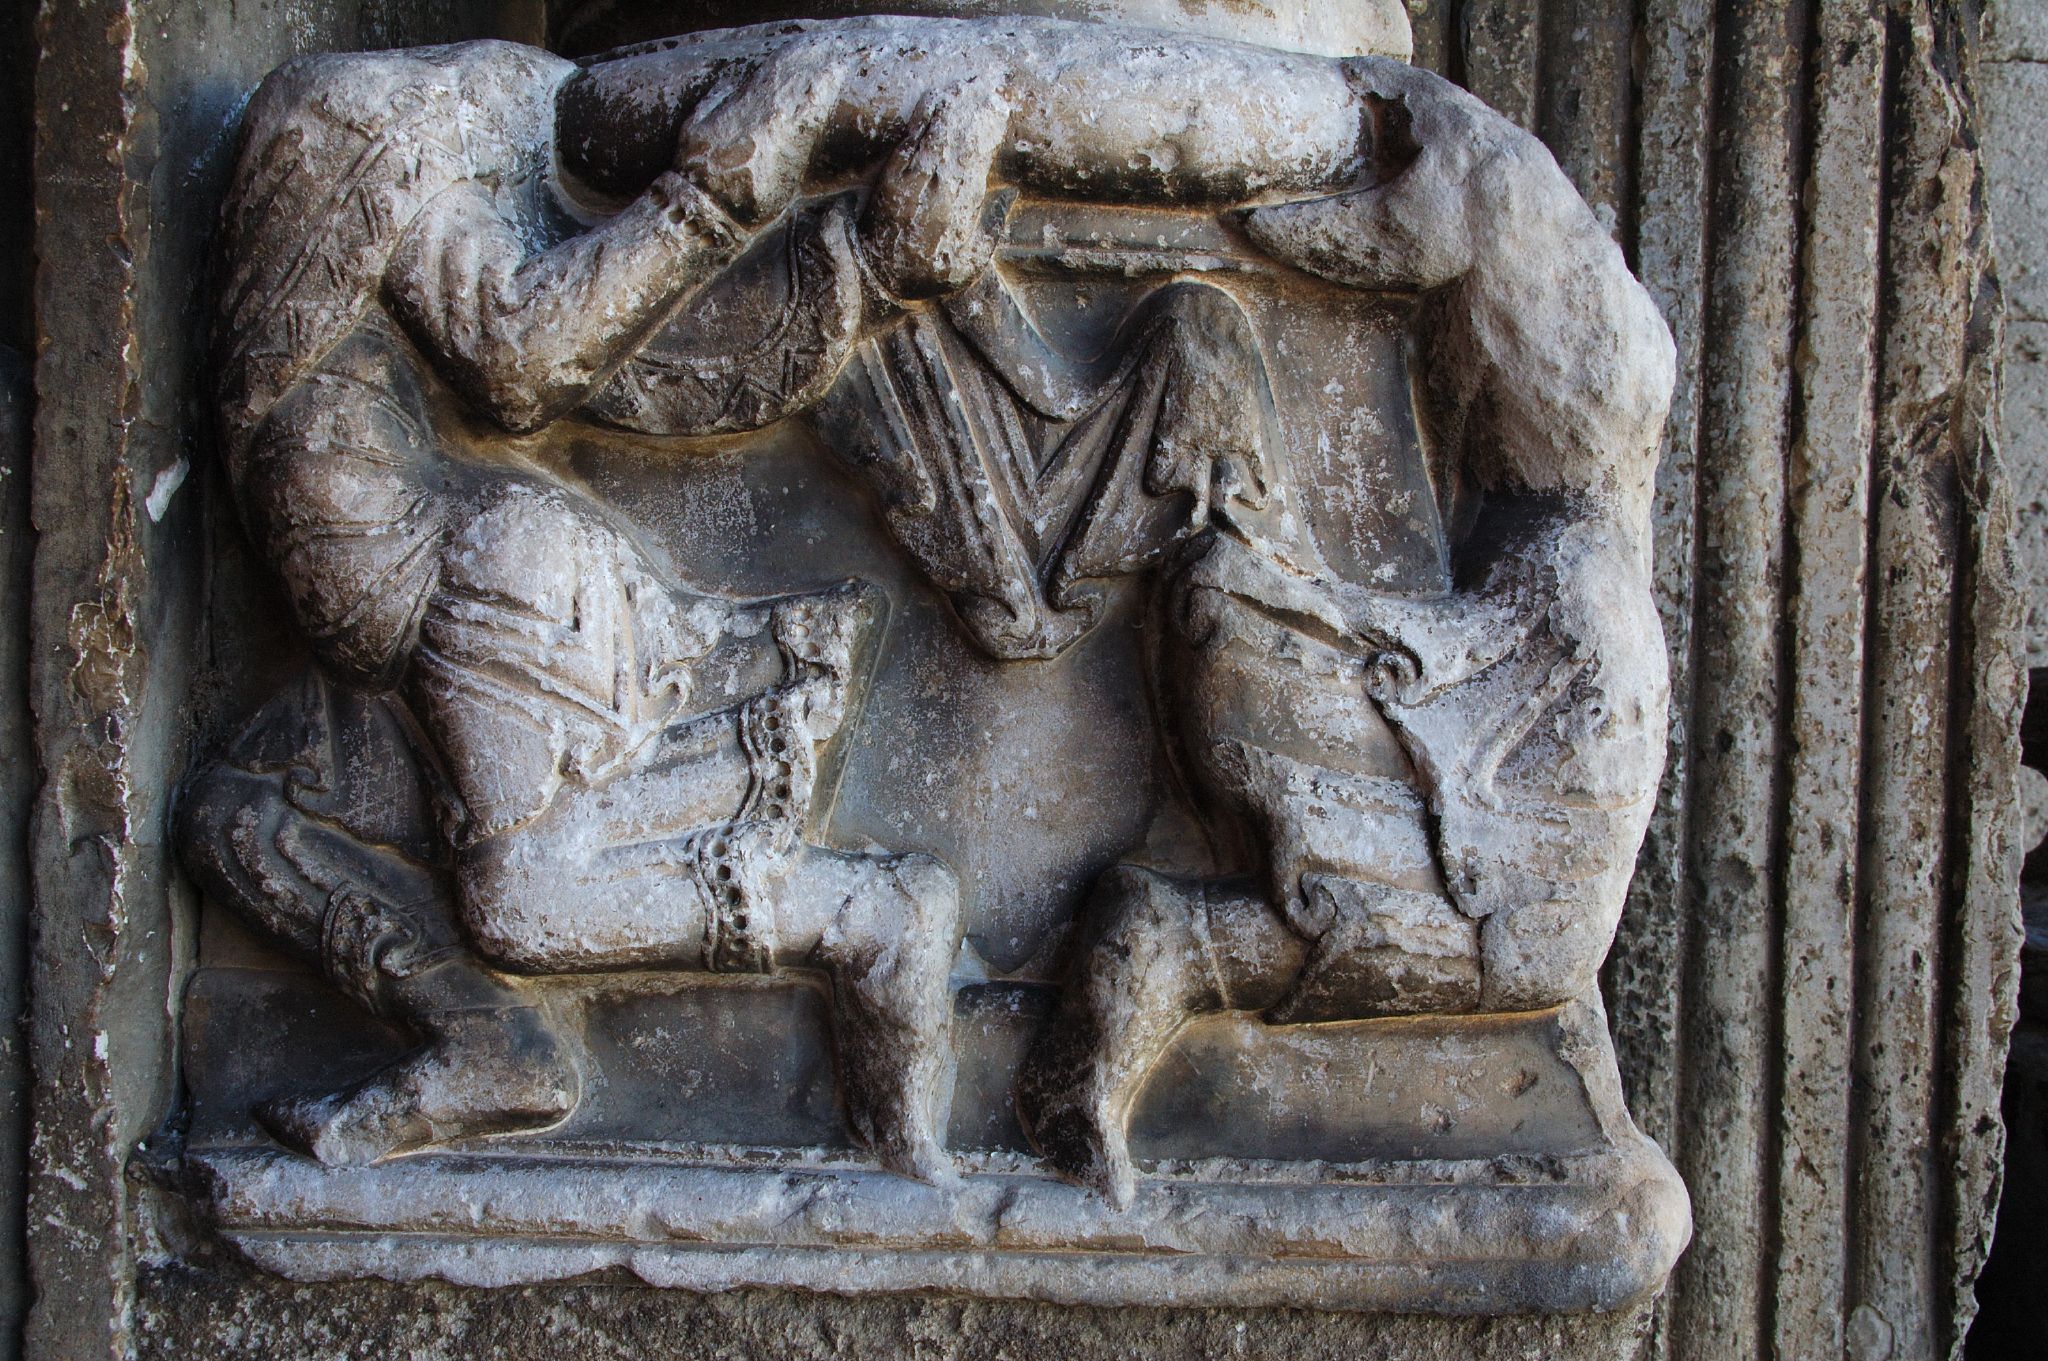 an artistic relief in stone depicting the fighting of agromia